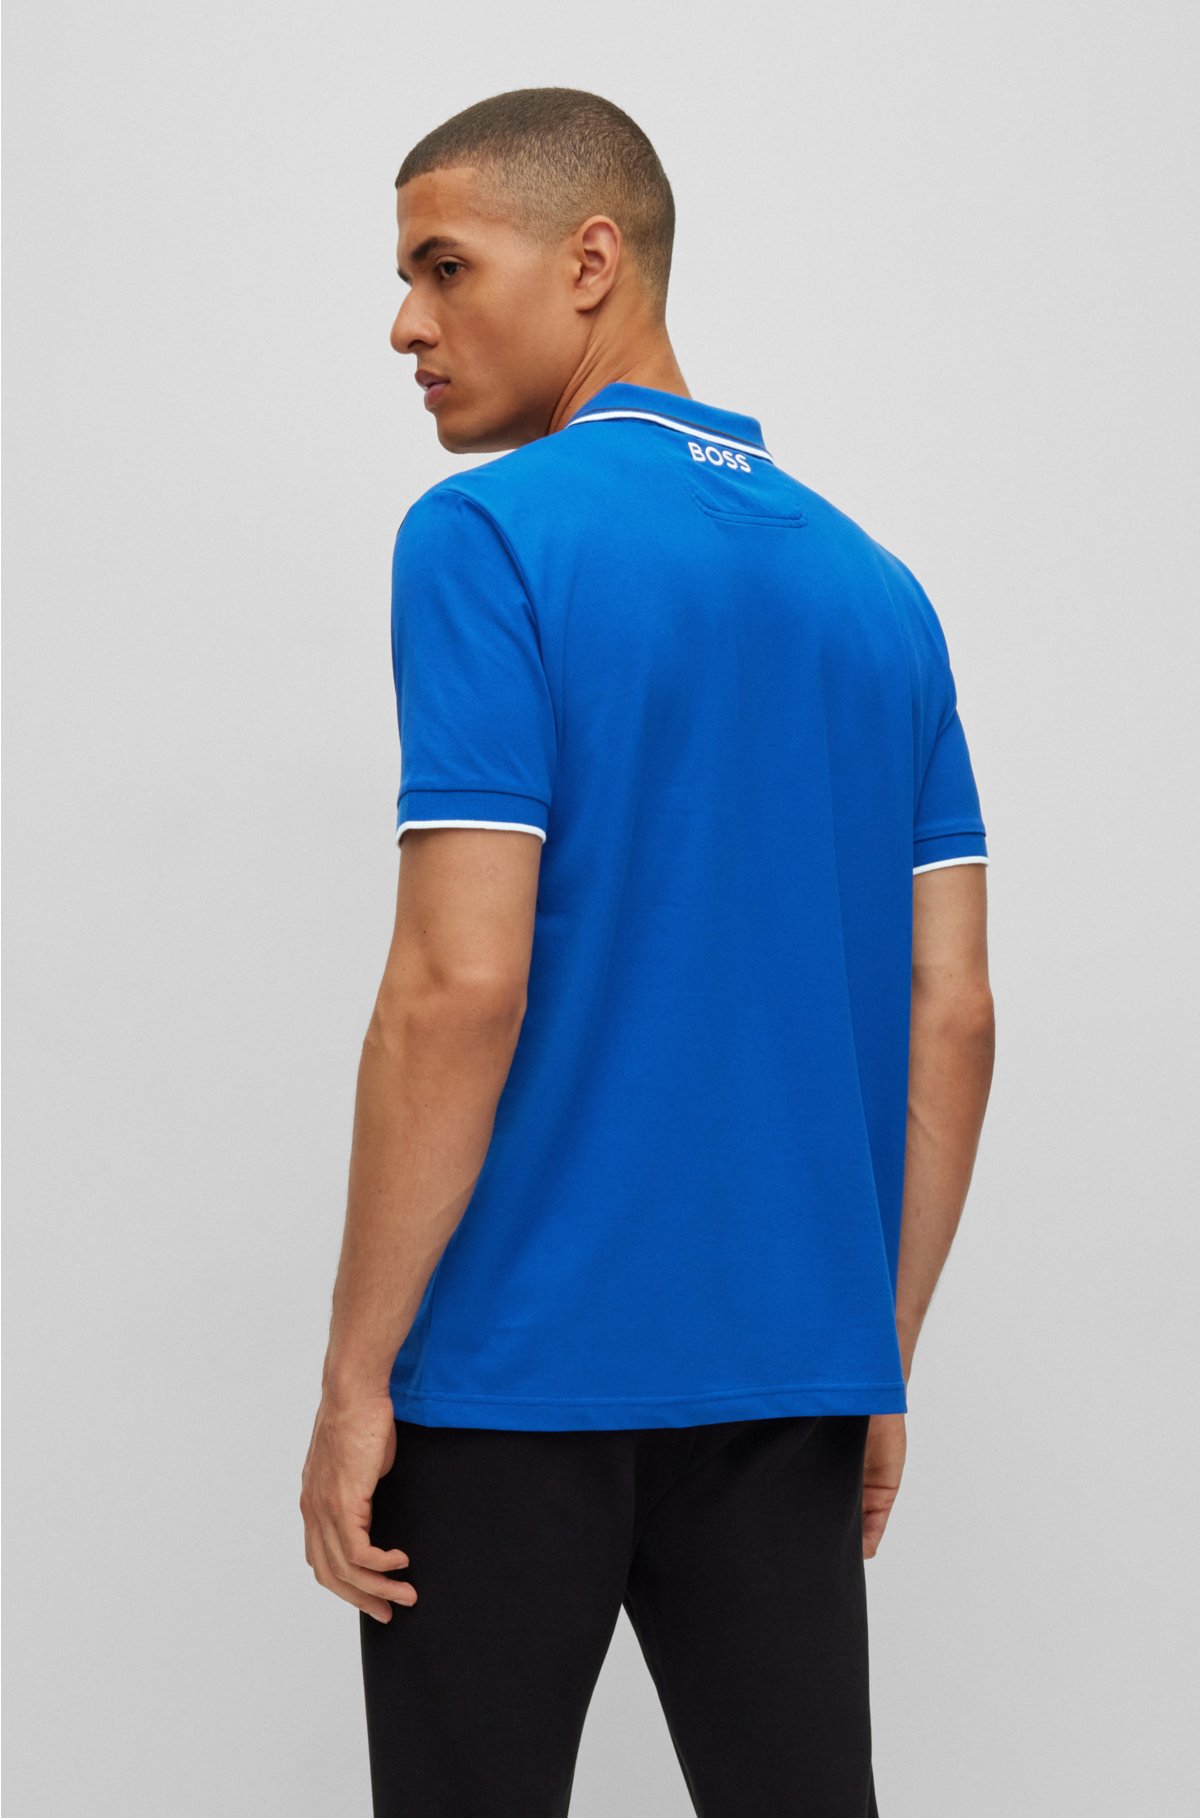 polo with shirt - Cotton-blend details BOSS contrast